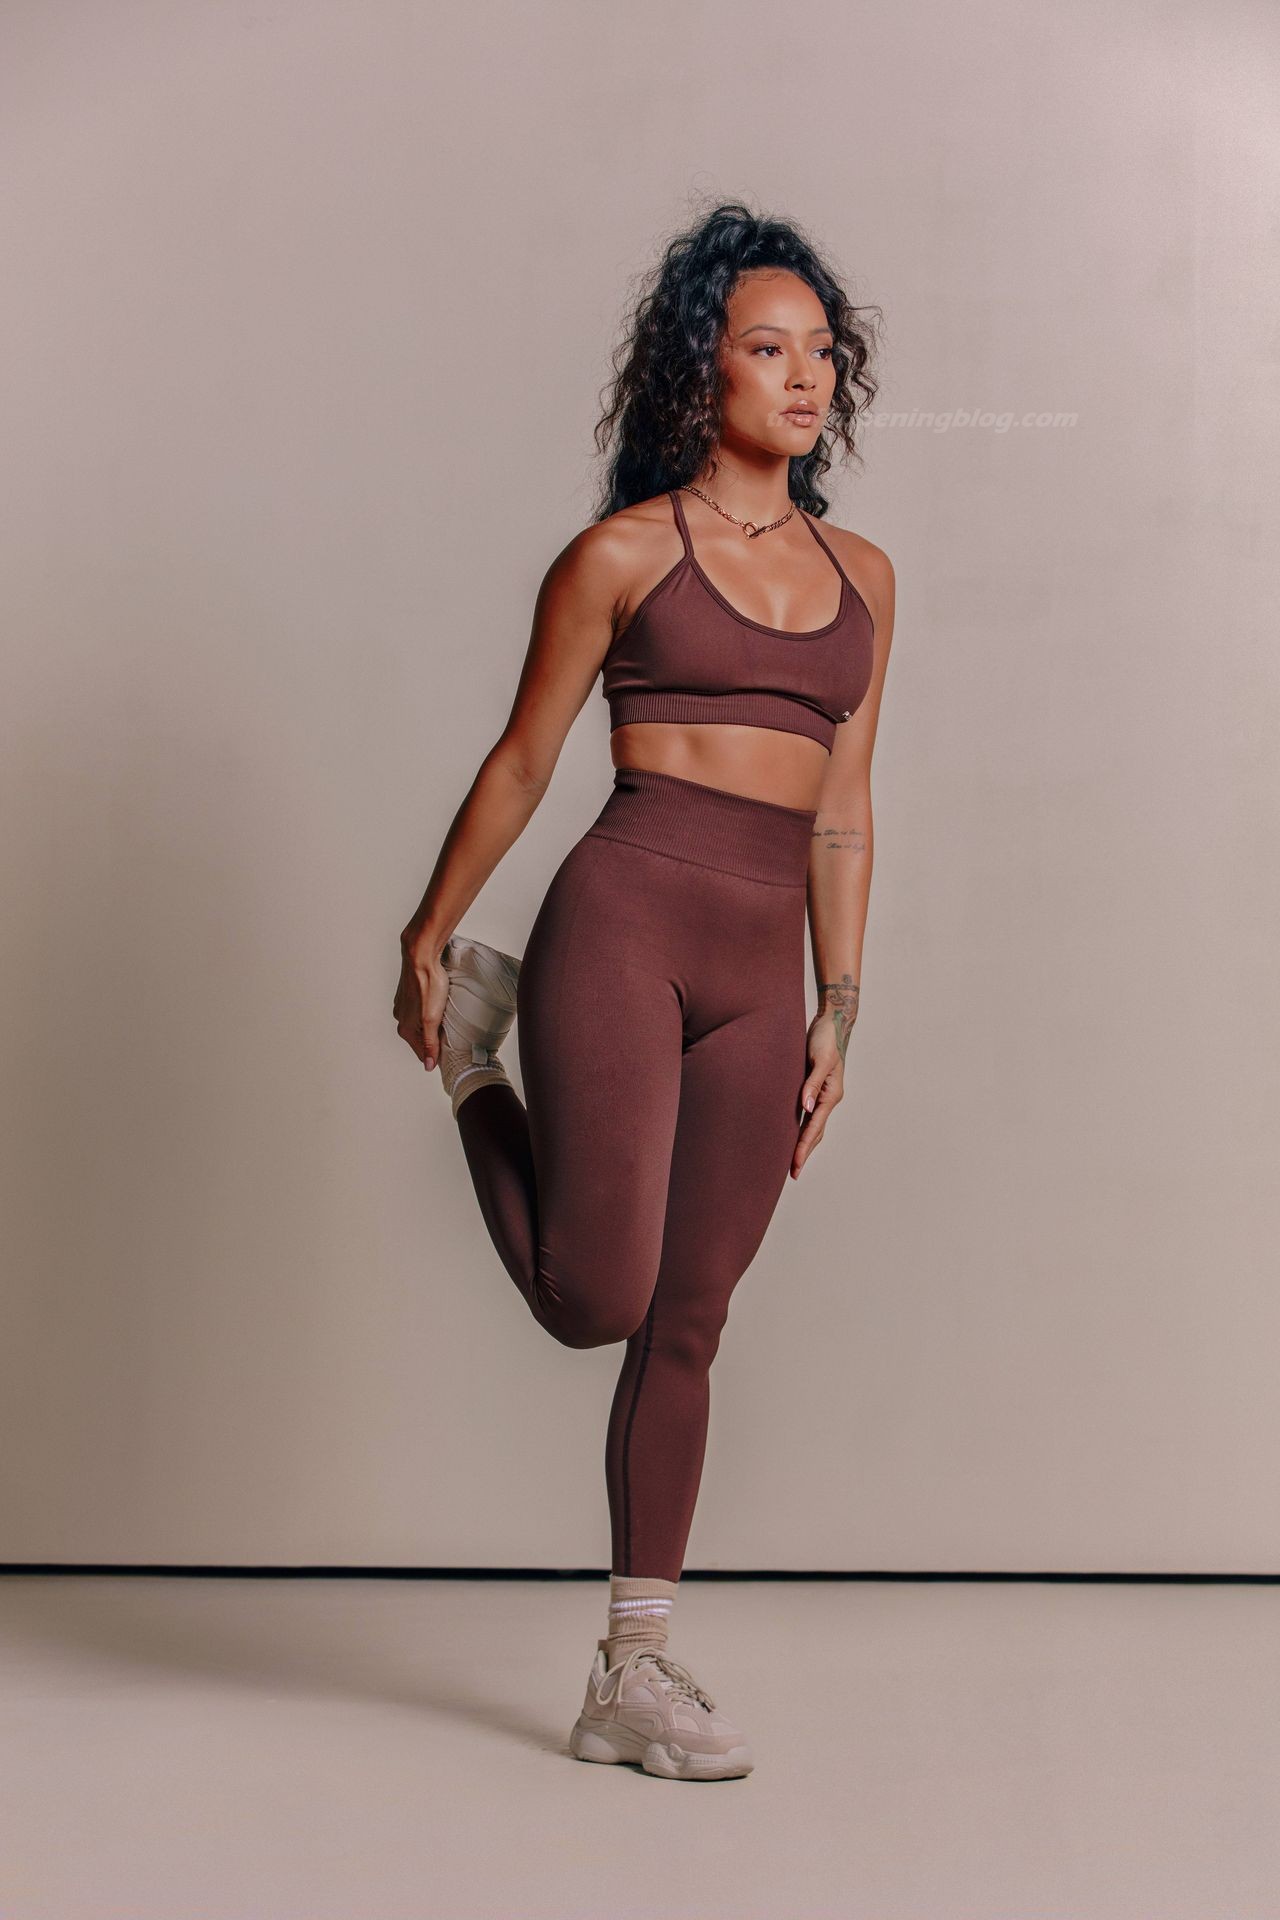 Karrueche Tran Shows Off Toned Body for PrettyLittleThing (16 Photos)